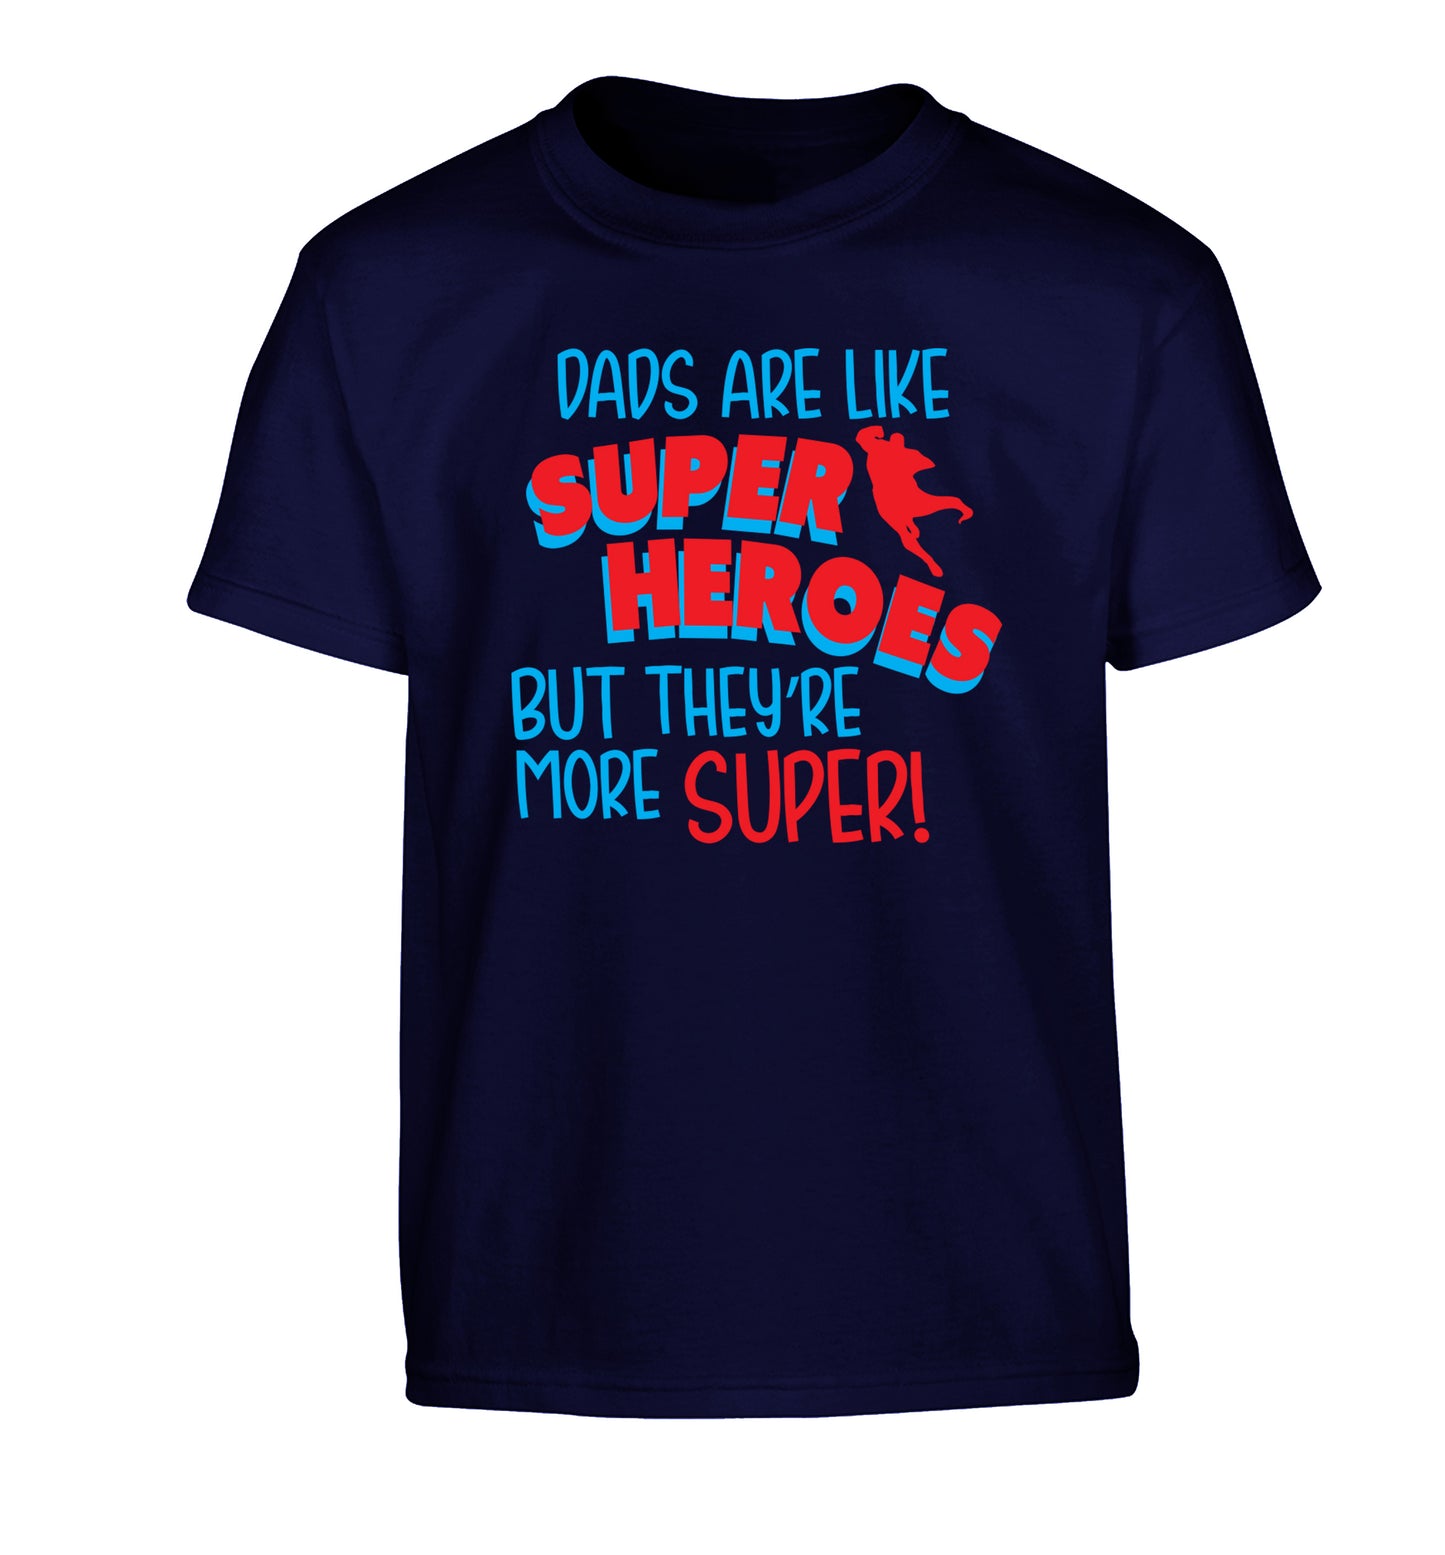 Dads are like superheros but they're more super Children's navy Tshirt 12-13 Years